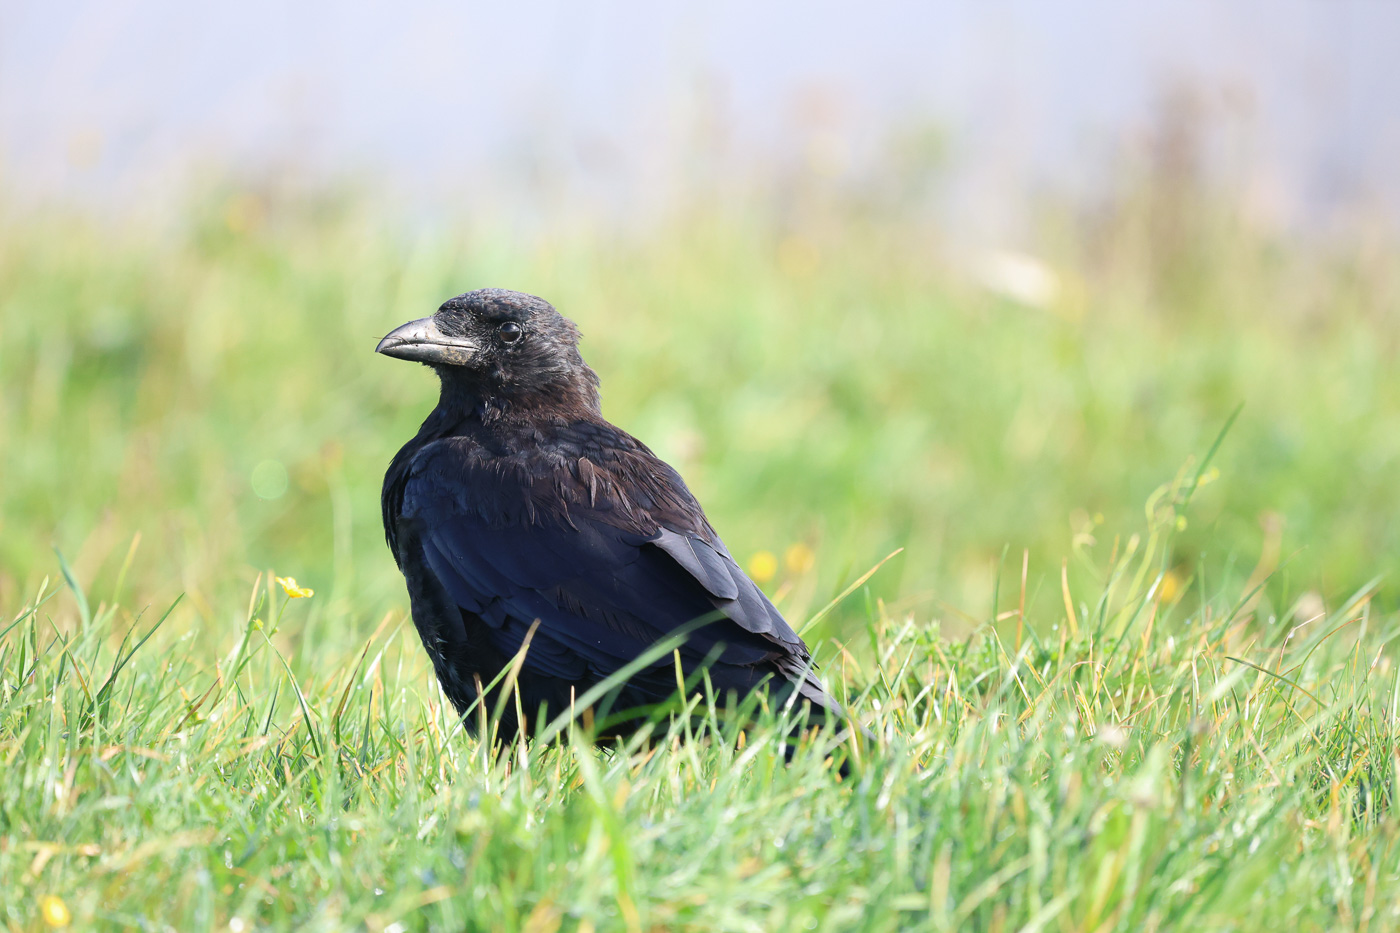 Crow captured with R6 mark II and 600mm f/11 prime lens